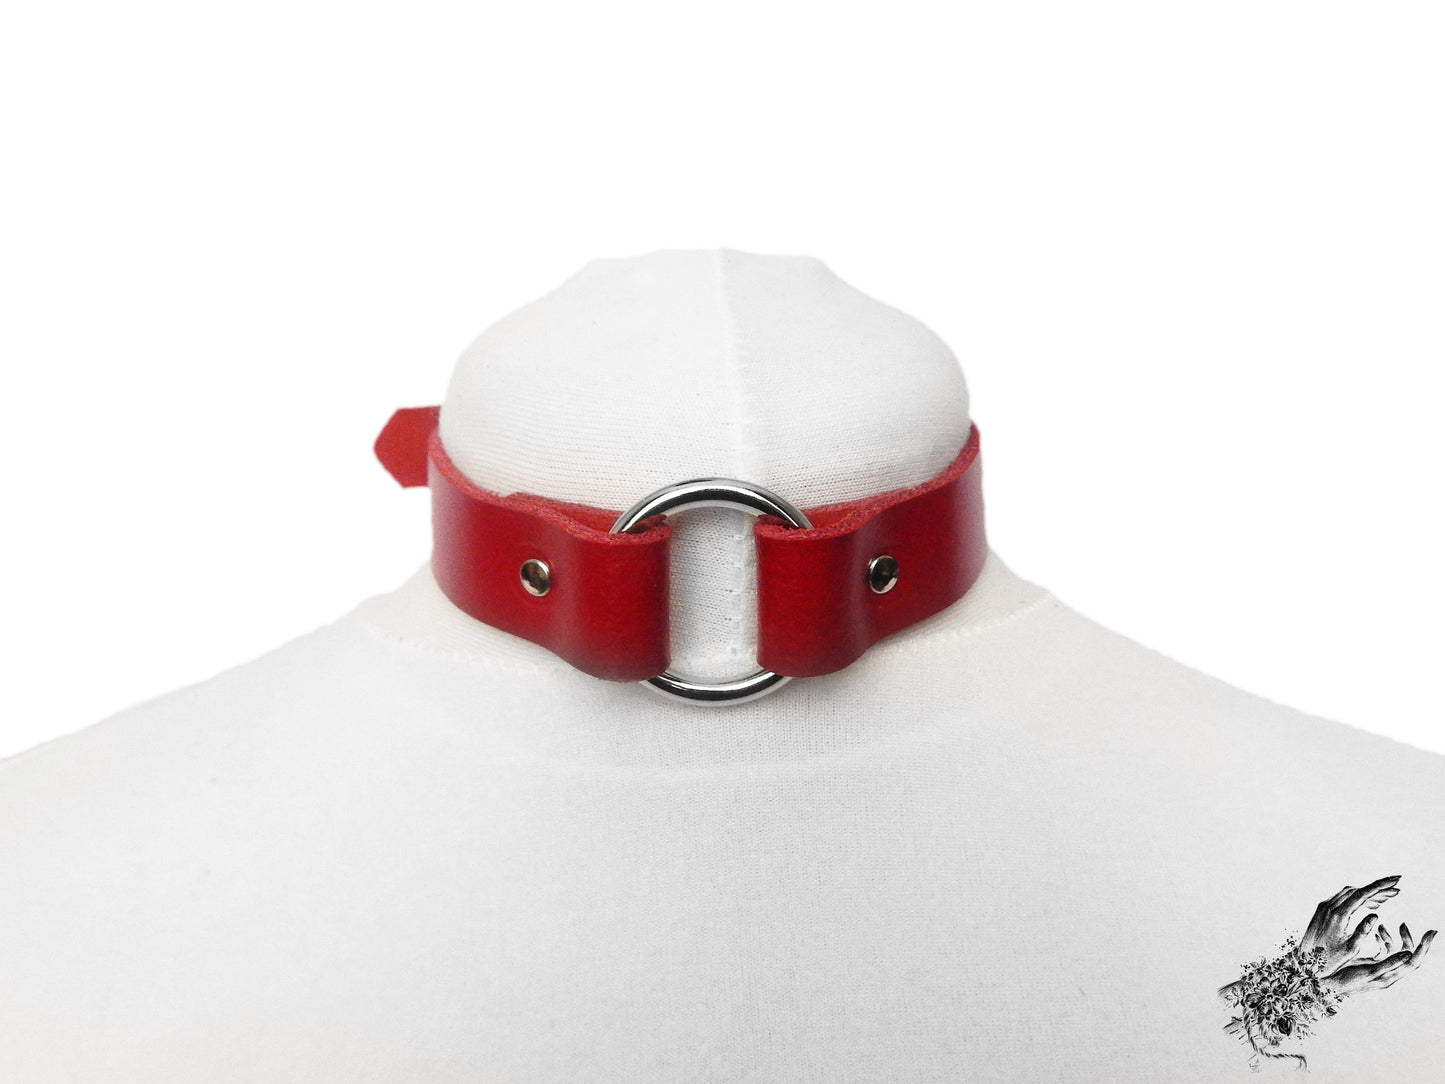 Red Leather O Ring Choker